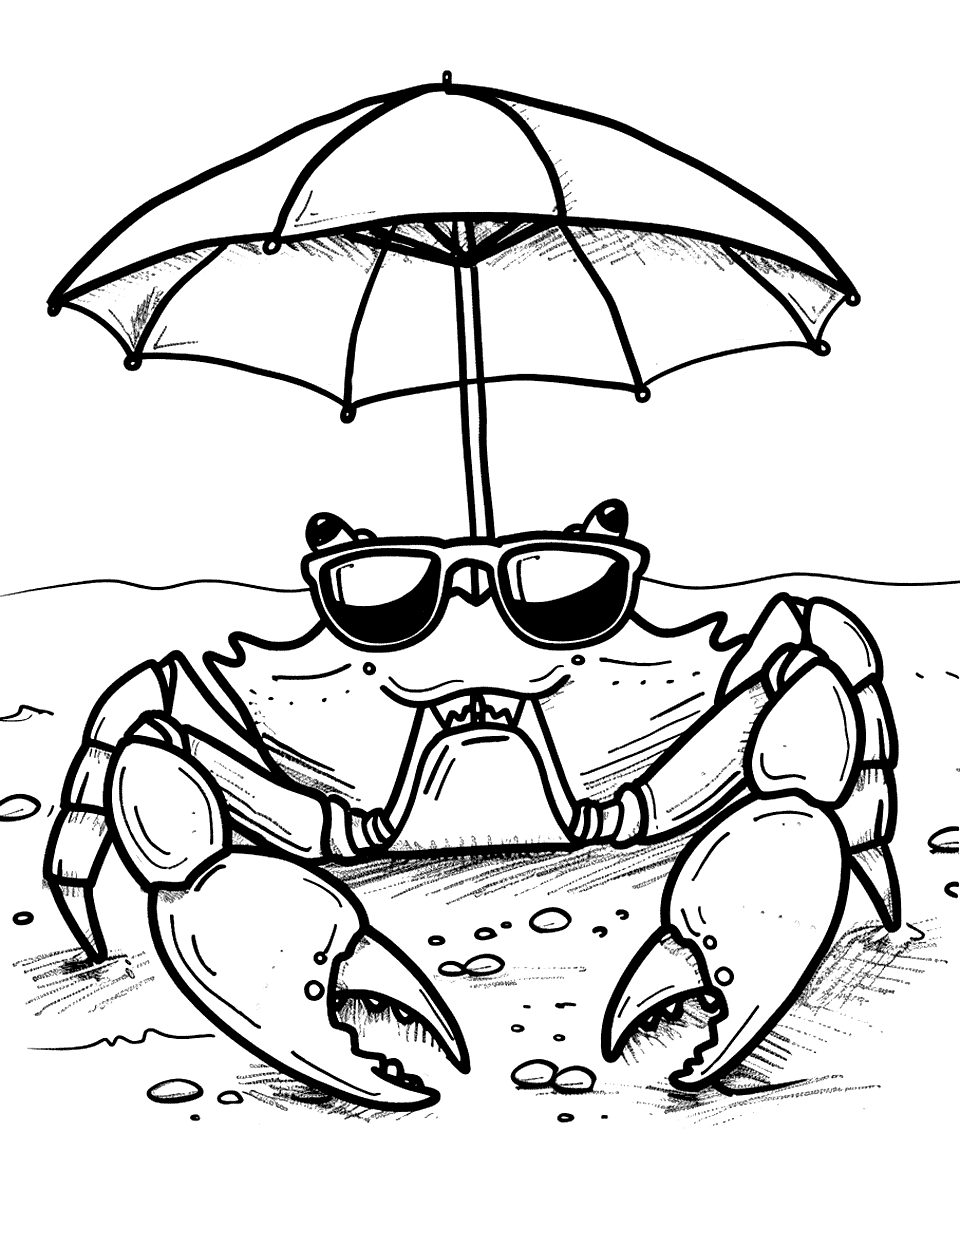 Summer Beach Day Crab Coloring Page - A cute, small crab wearing sunglasses, sitting under a beach umbrella.